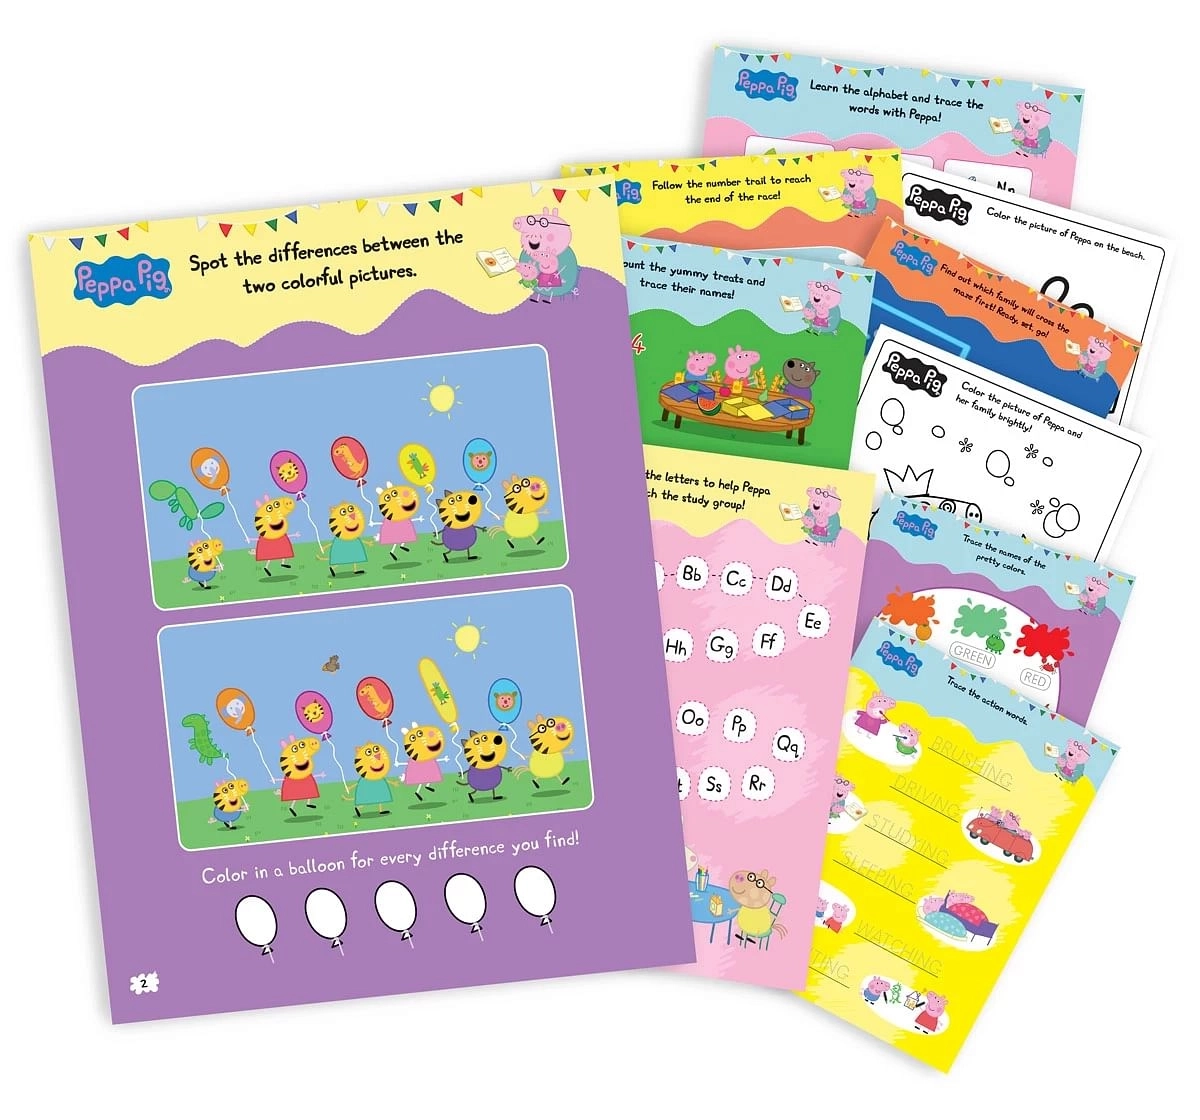 Wonder House Books Peppa Pig Fun Learning Activity Kit for kids 3Y+, Multicolour